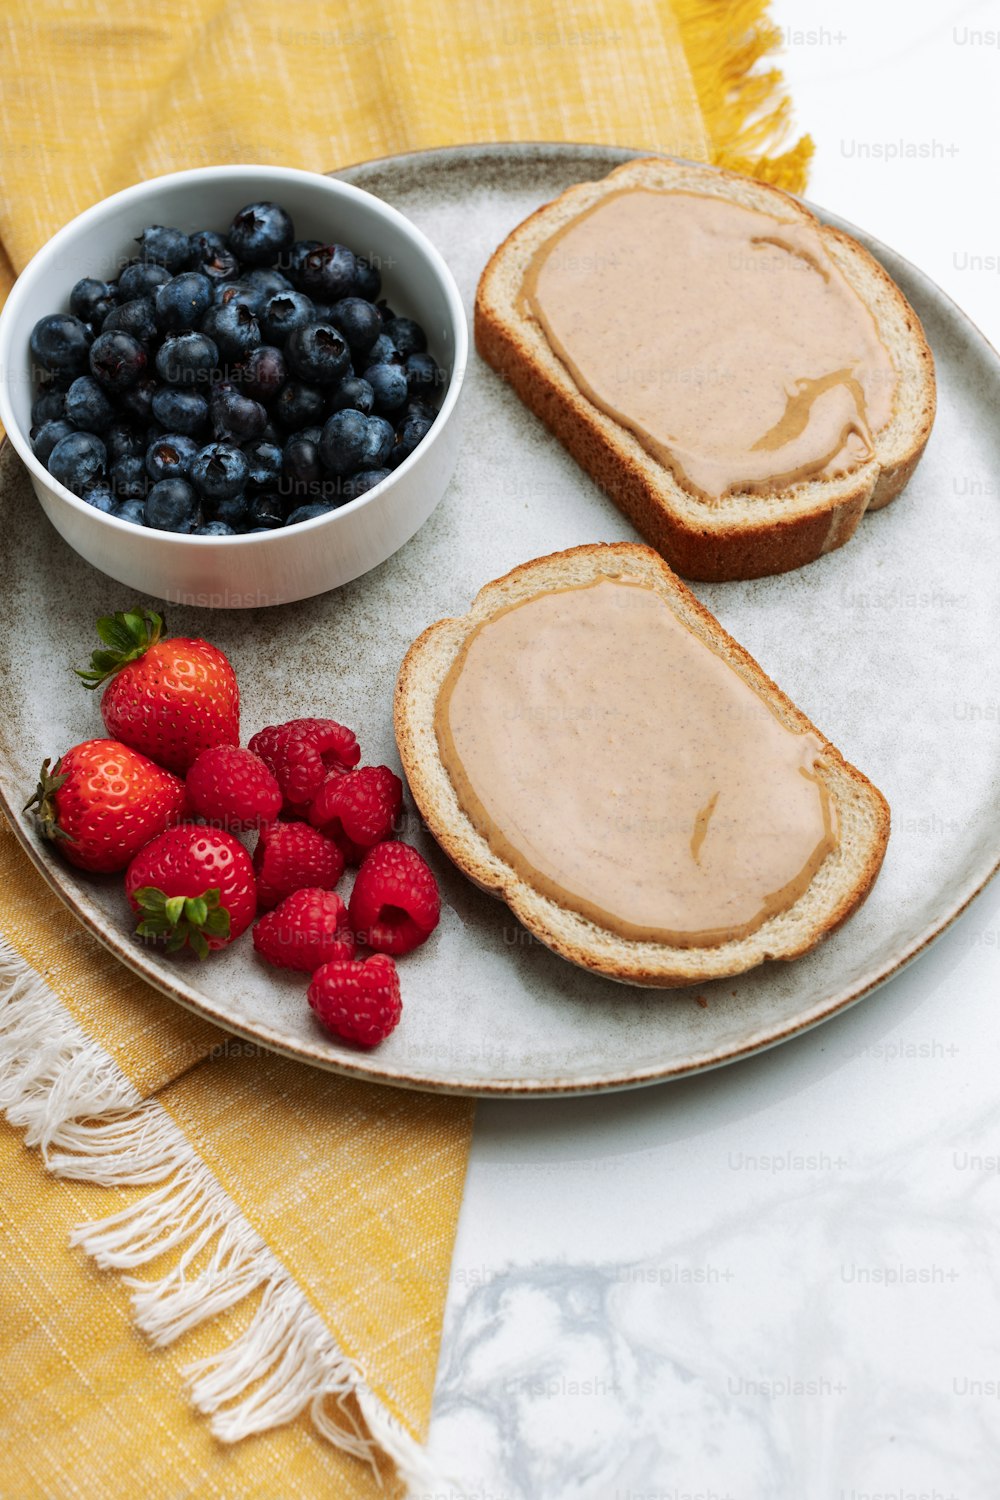 a plate of toast, berries and a bowl of peanut butter